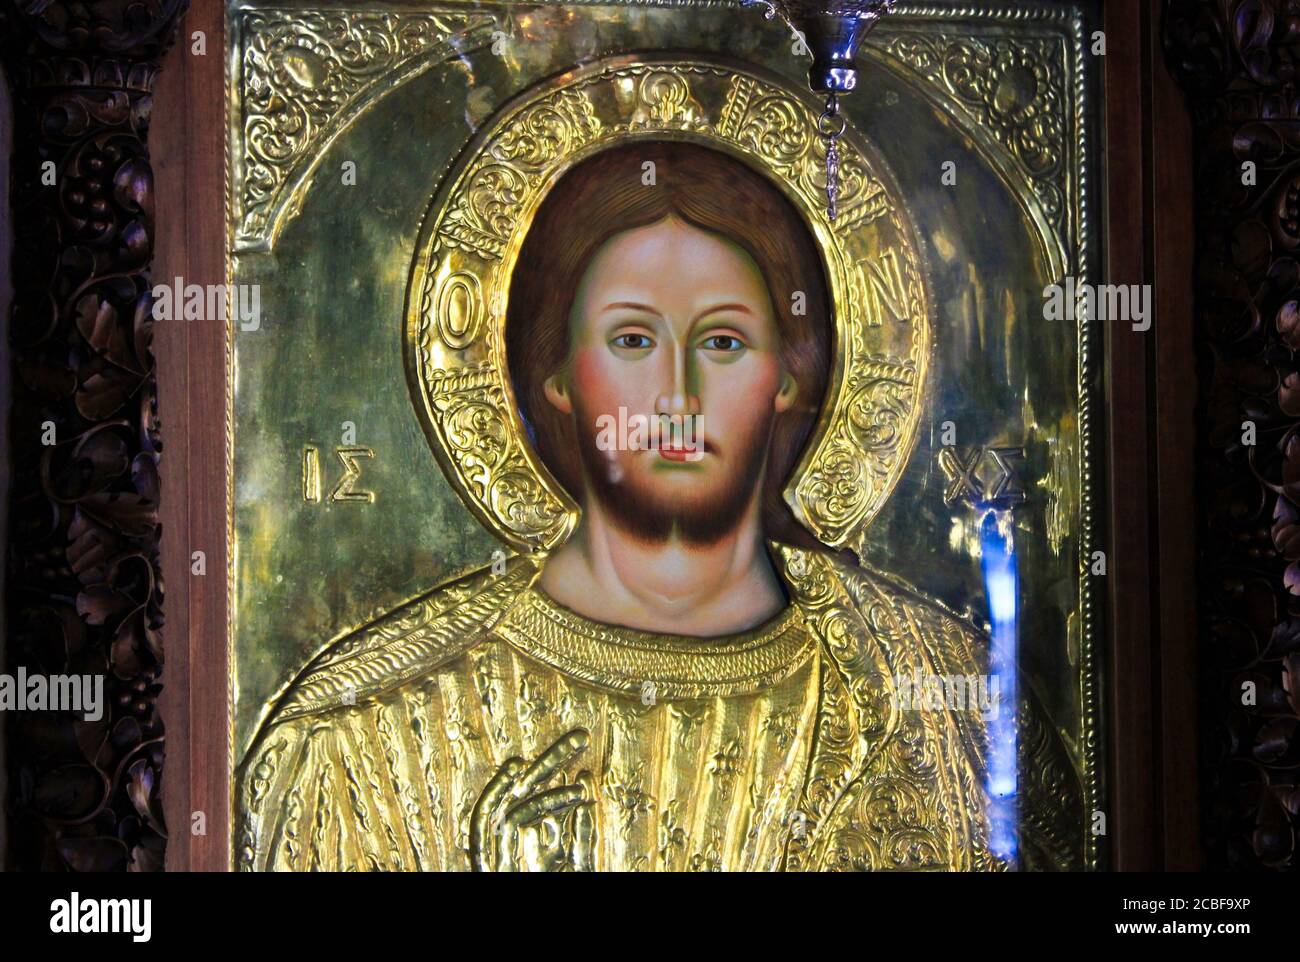 Greece, Athens, August 11 2020 - Icon of Jesus Christ, handcrafted and covered with gold, inside a Christian orthodox church. Stock Photo